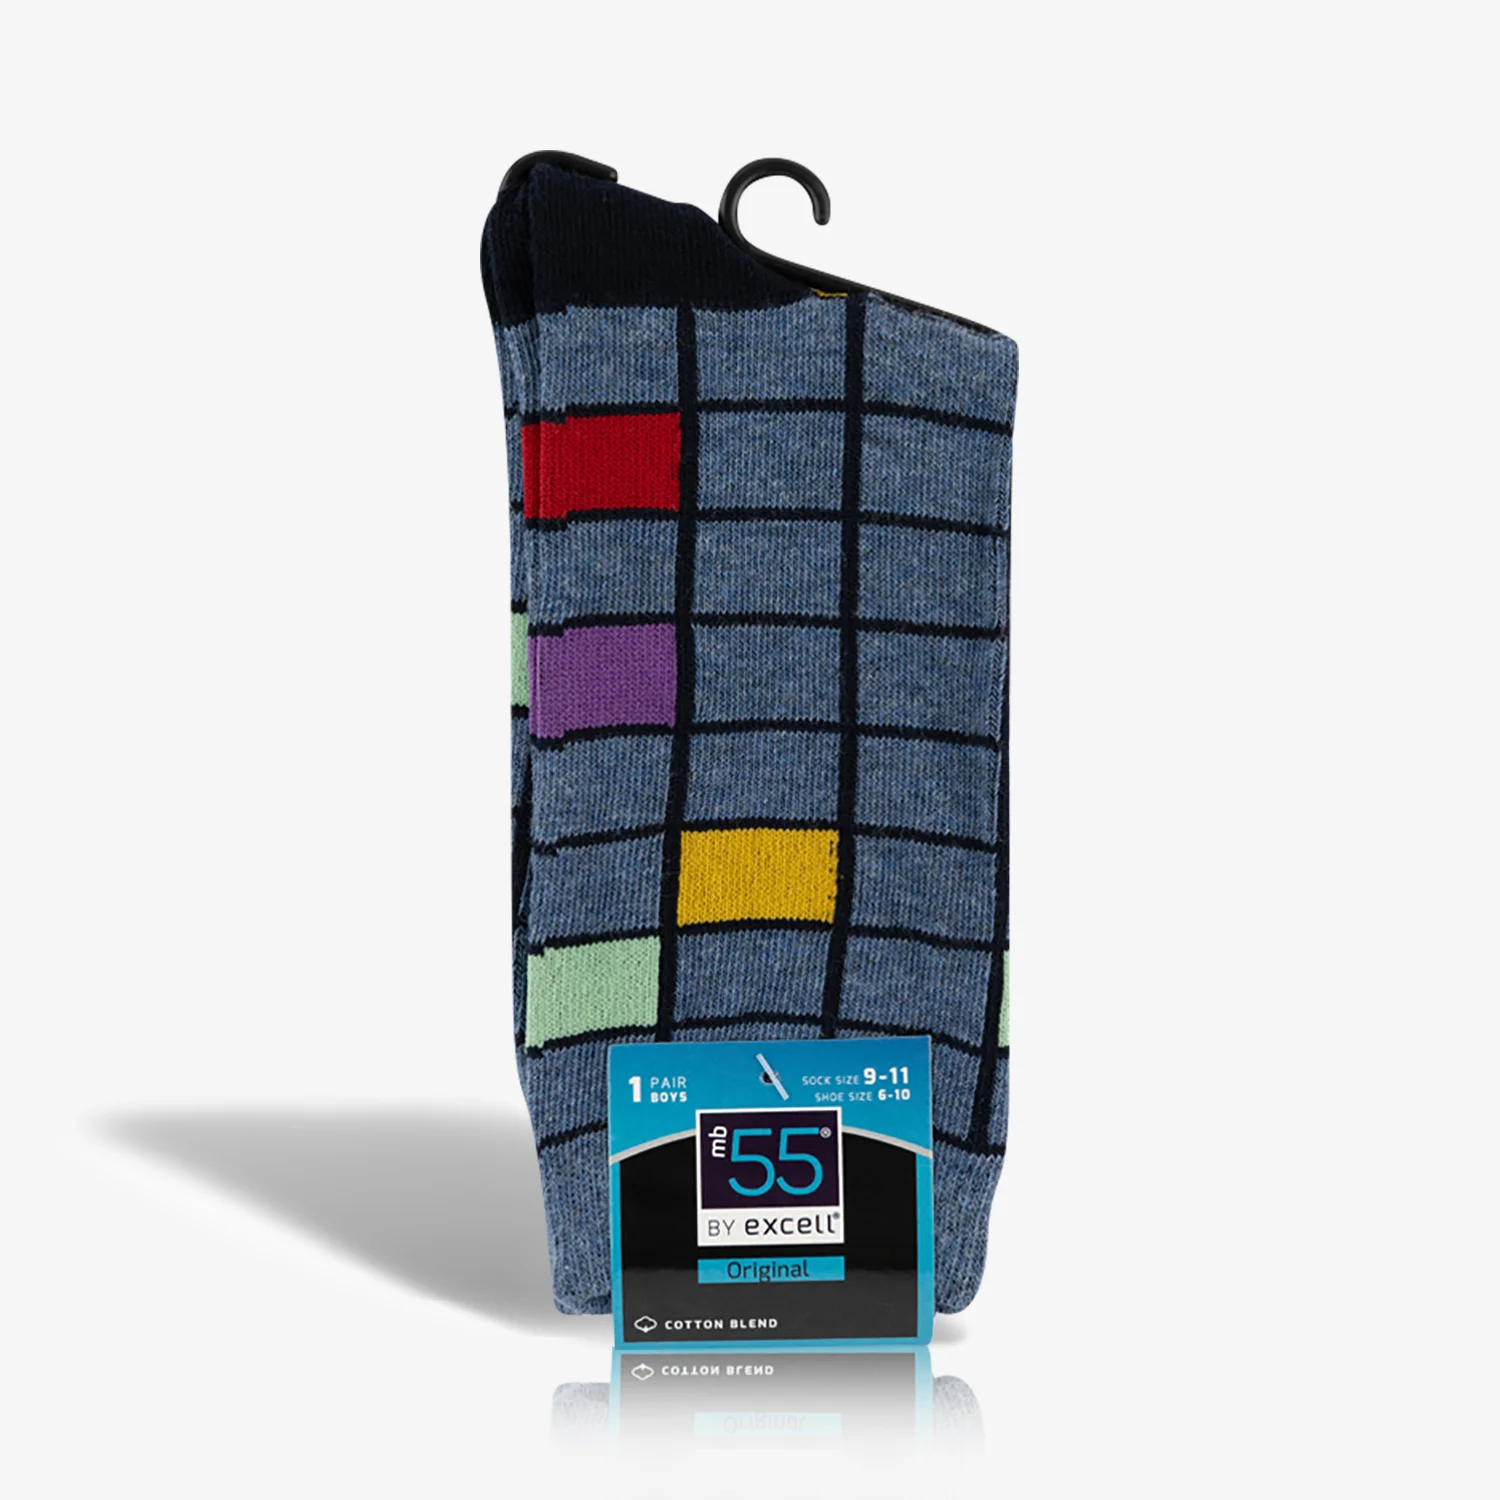 3 Pair Boys dress Cotton Blend Socks with colorful squares.